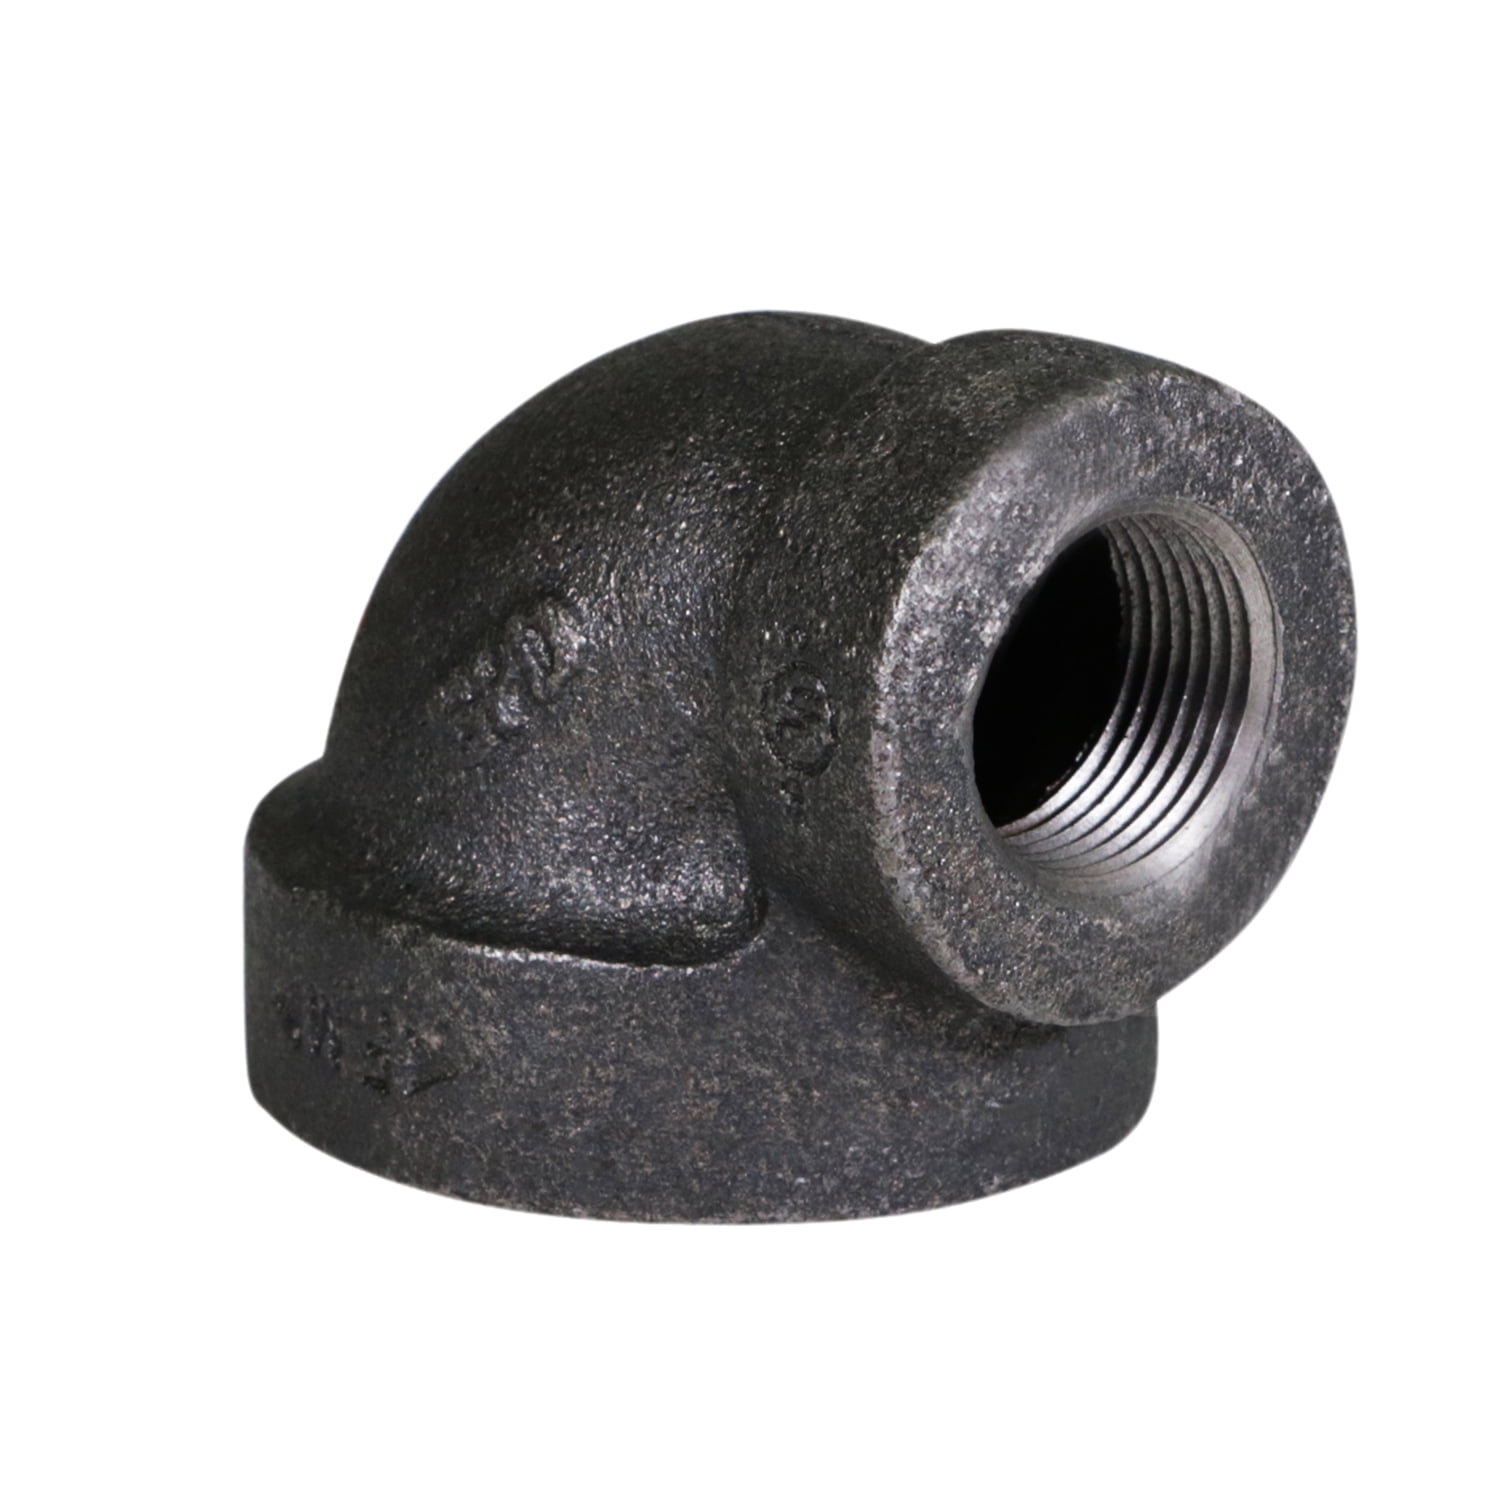 Black Malleable Iron Cast Pipe Fitting Elbow 90 Degree 1/2" 